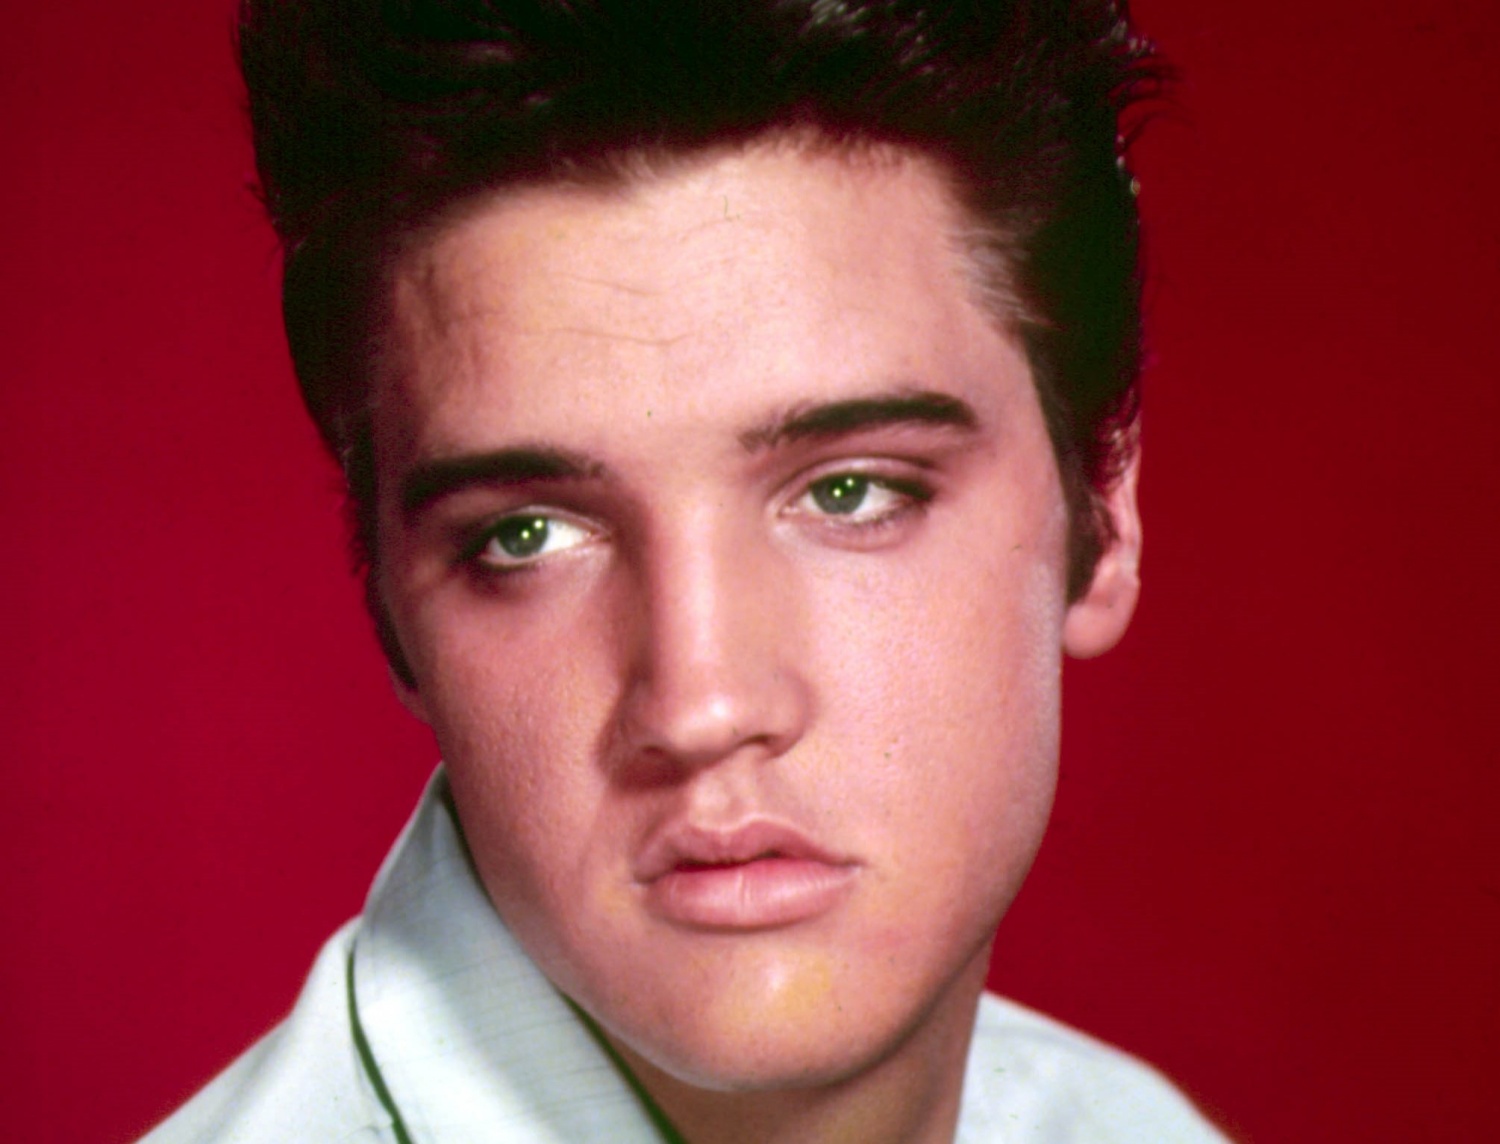 Elvis Presley Had Bizarre Connection With Aliens Who Predicted His Career, Close Pal Claims